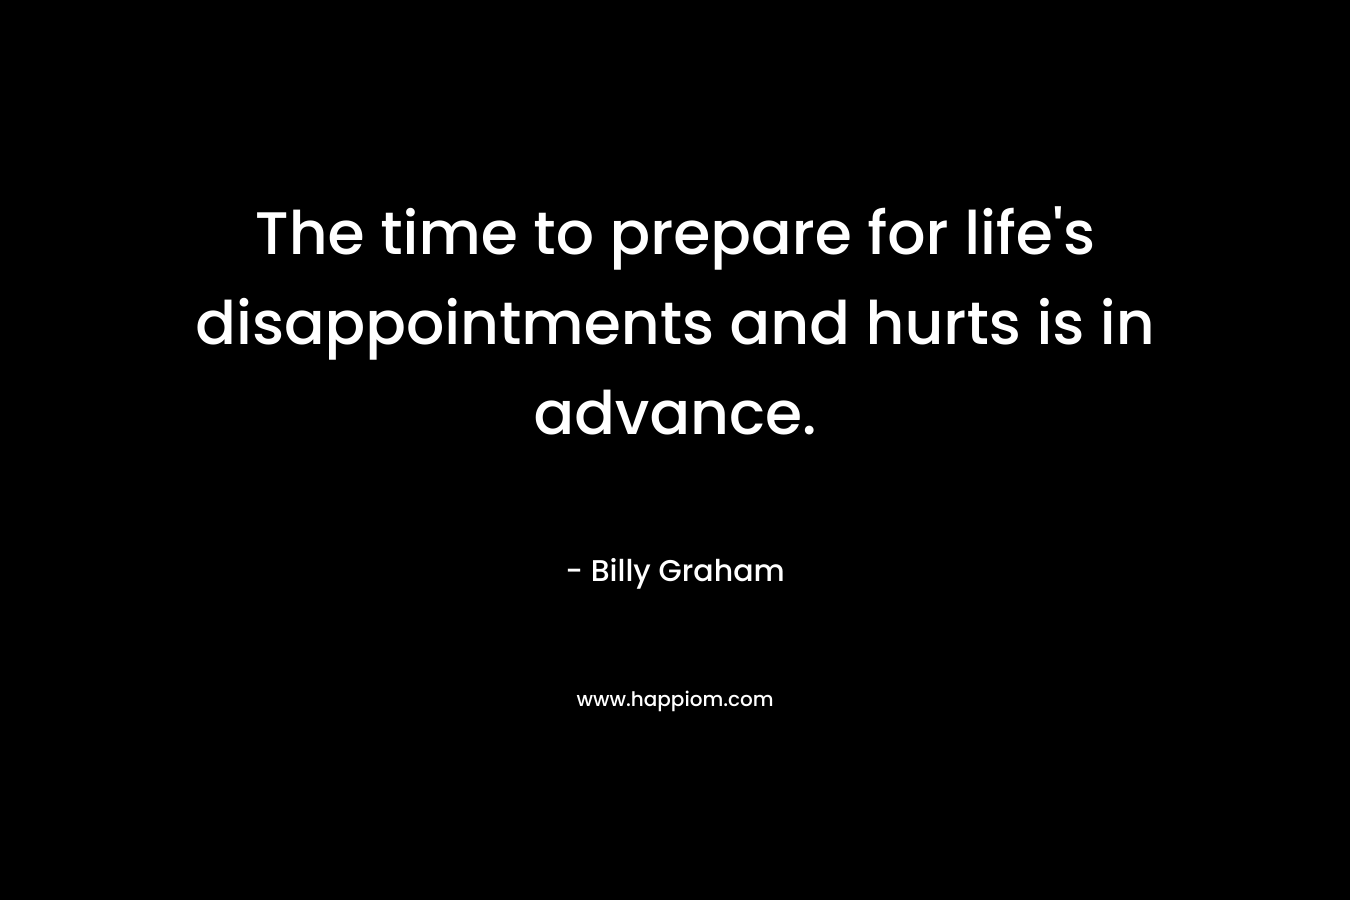 The time to prepare for life's disappointments and hurts is in advance.